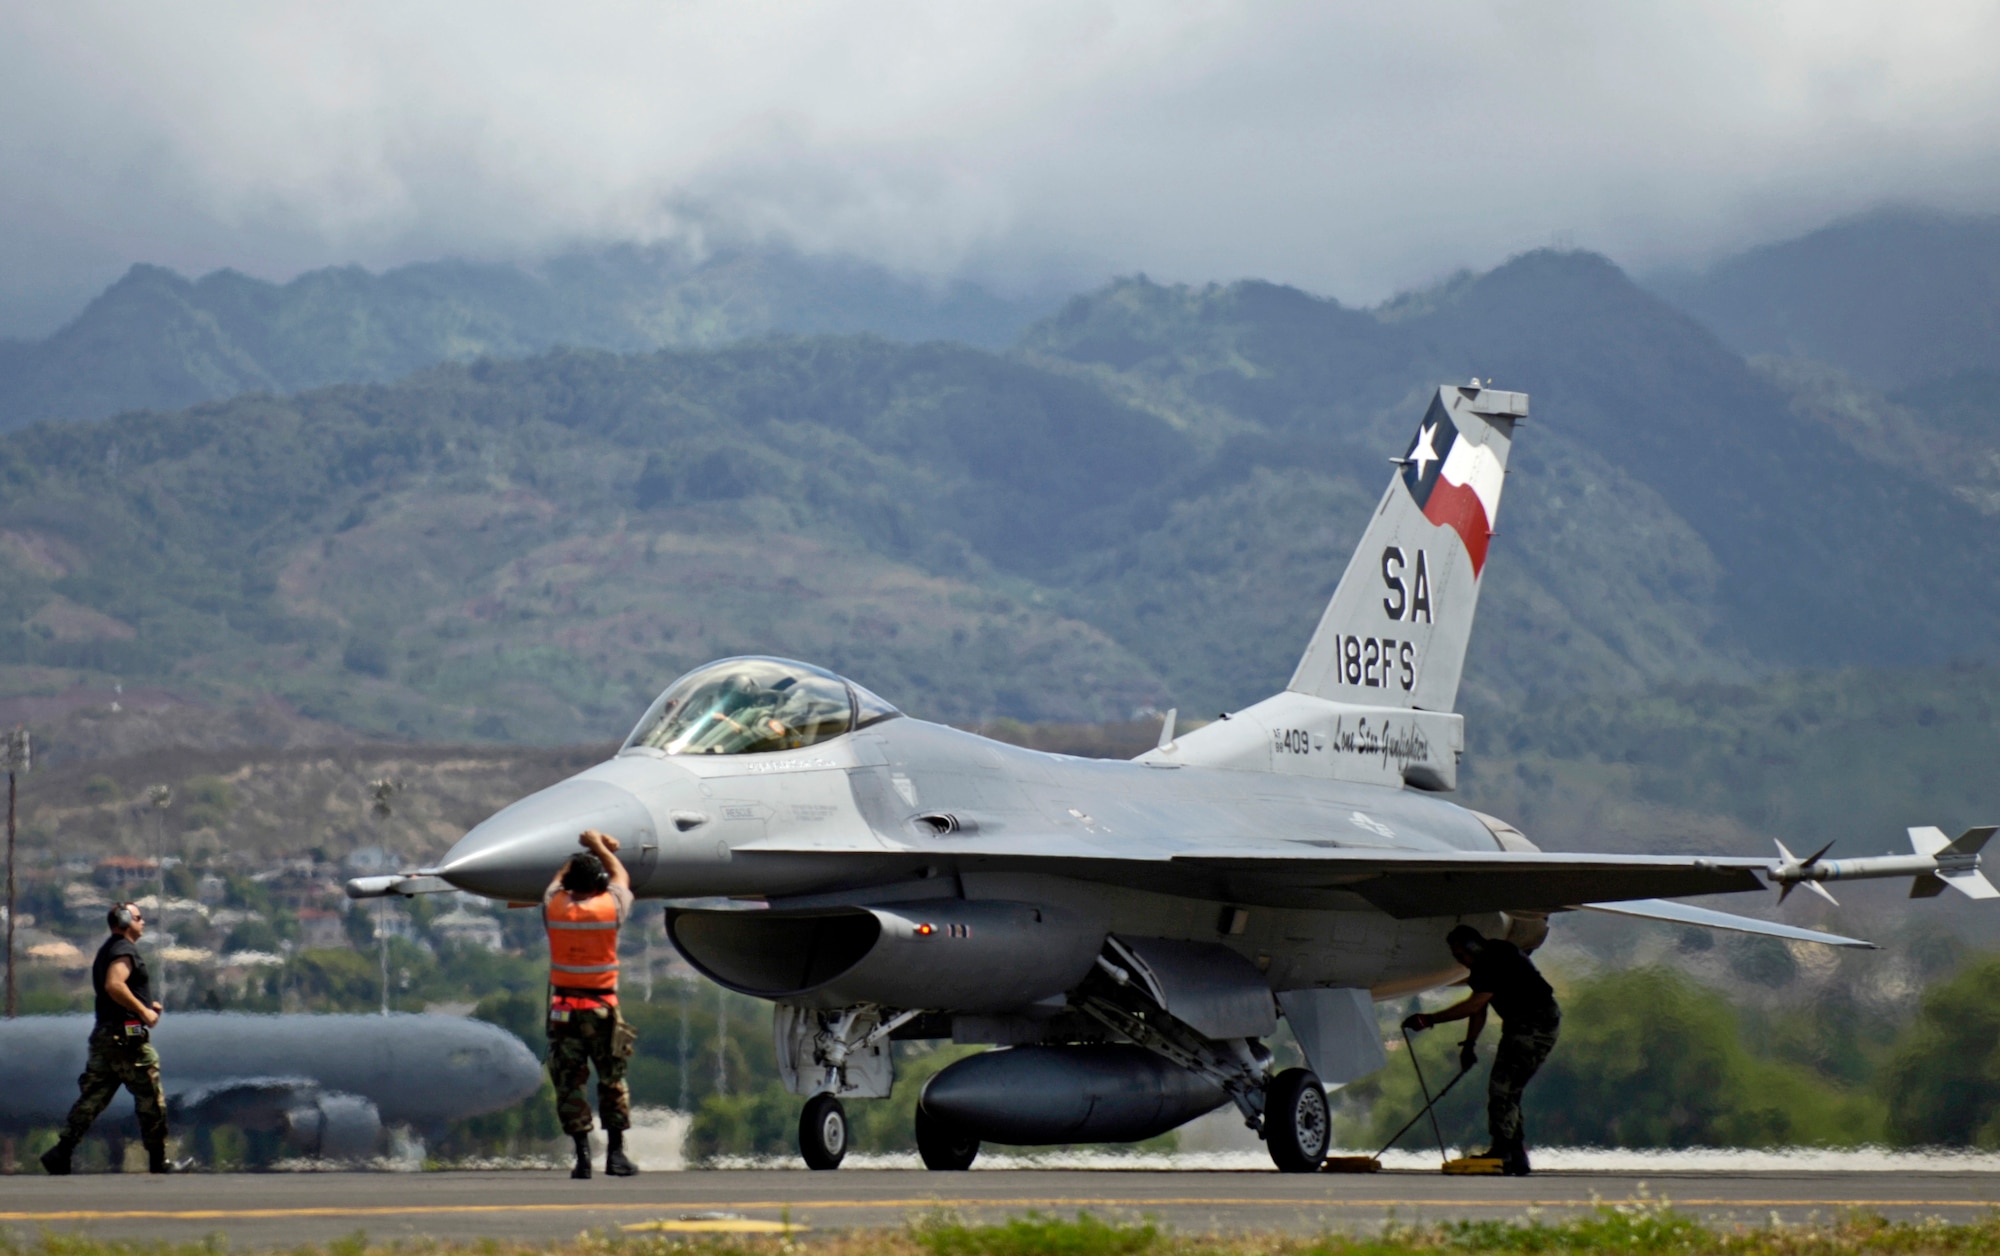 Crew chiefs recover their F-16 Fighting Falcon after it returned to Hickam Air Force Base, Hawaii from an air to air mission Sept. 8, 2006 during Exercise Sentry Aloha. The crew chiefs are from the Texas Air National Guard 149th Fighter Wing.  The exercise brings dissimilar combat assets to Hickam to train with the Hawaii Air National Guard’s 199th Fighter Squadron. (U.S. Air Force photo/ Tech. Sgt. Shane A. Cuomo)